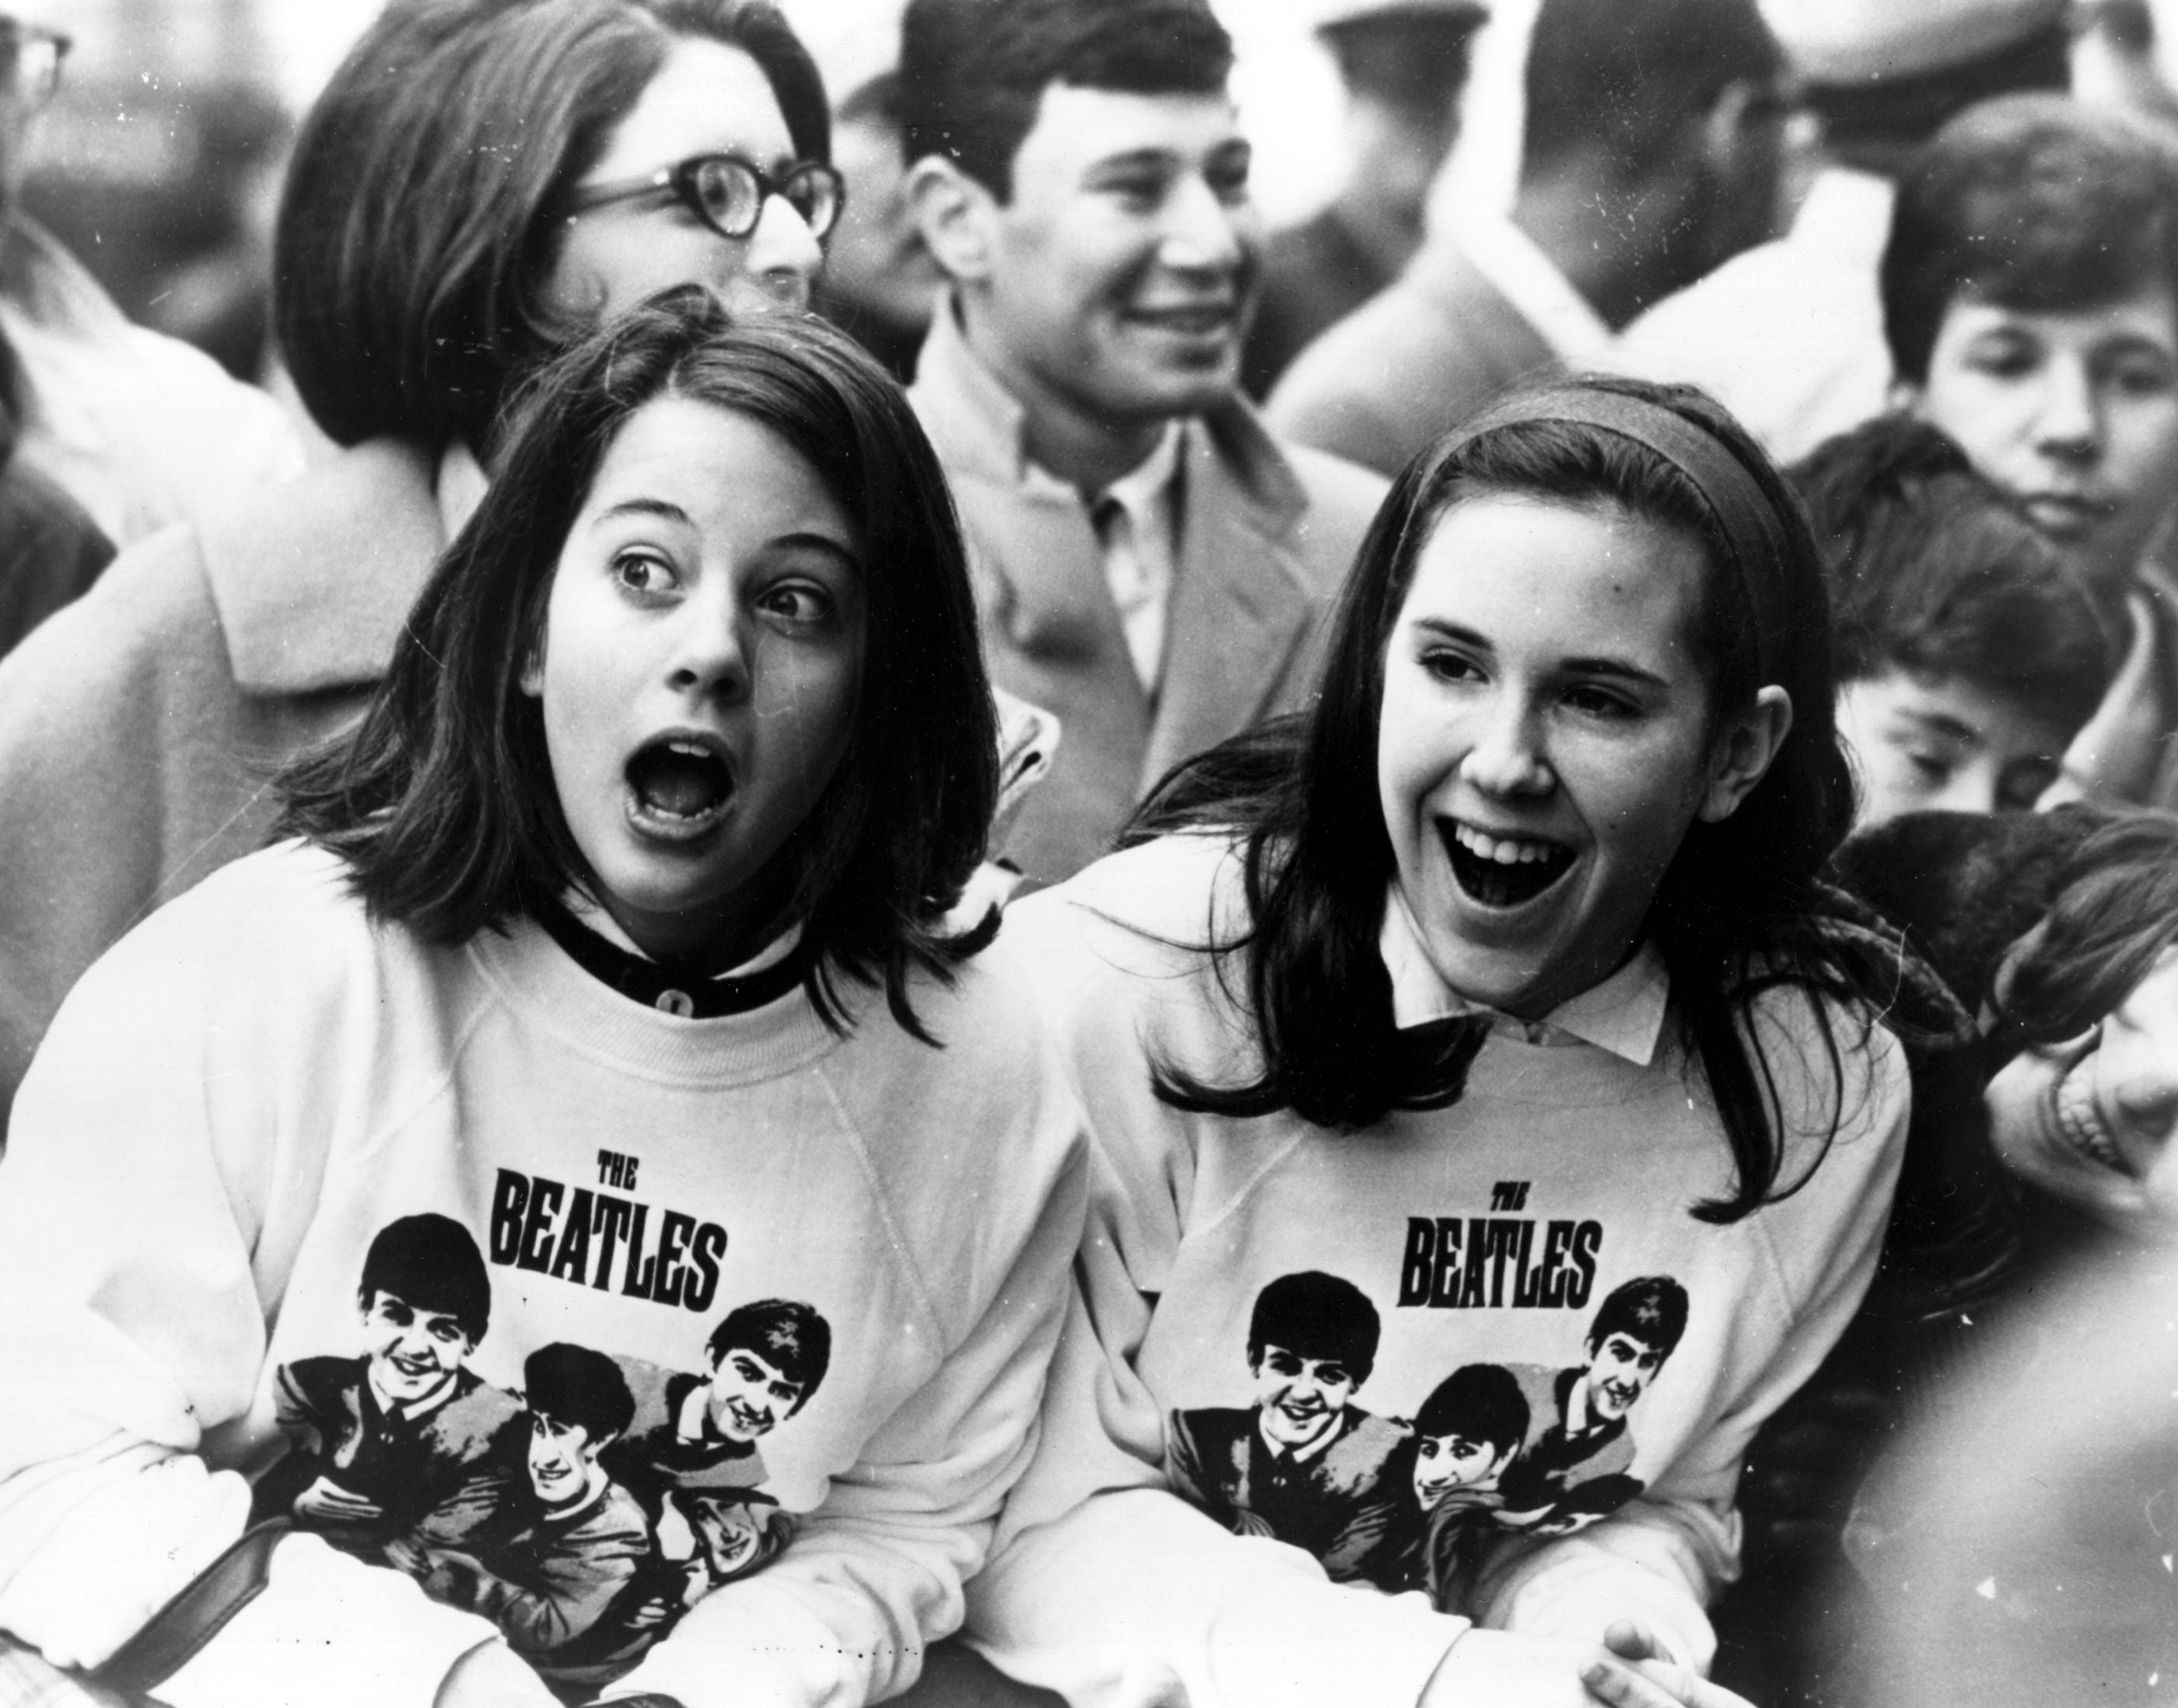 Two excited girls in Beatles sweatshirts among a crowd of fans in New York, welcoming the group as they arrive at the airport in February 1964